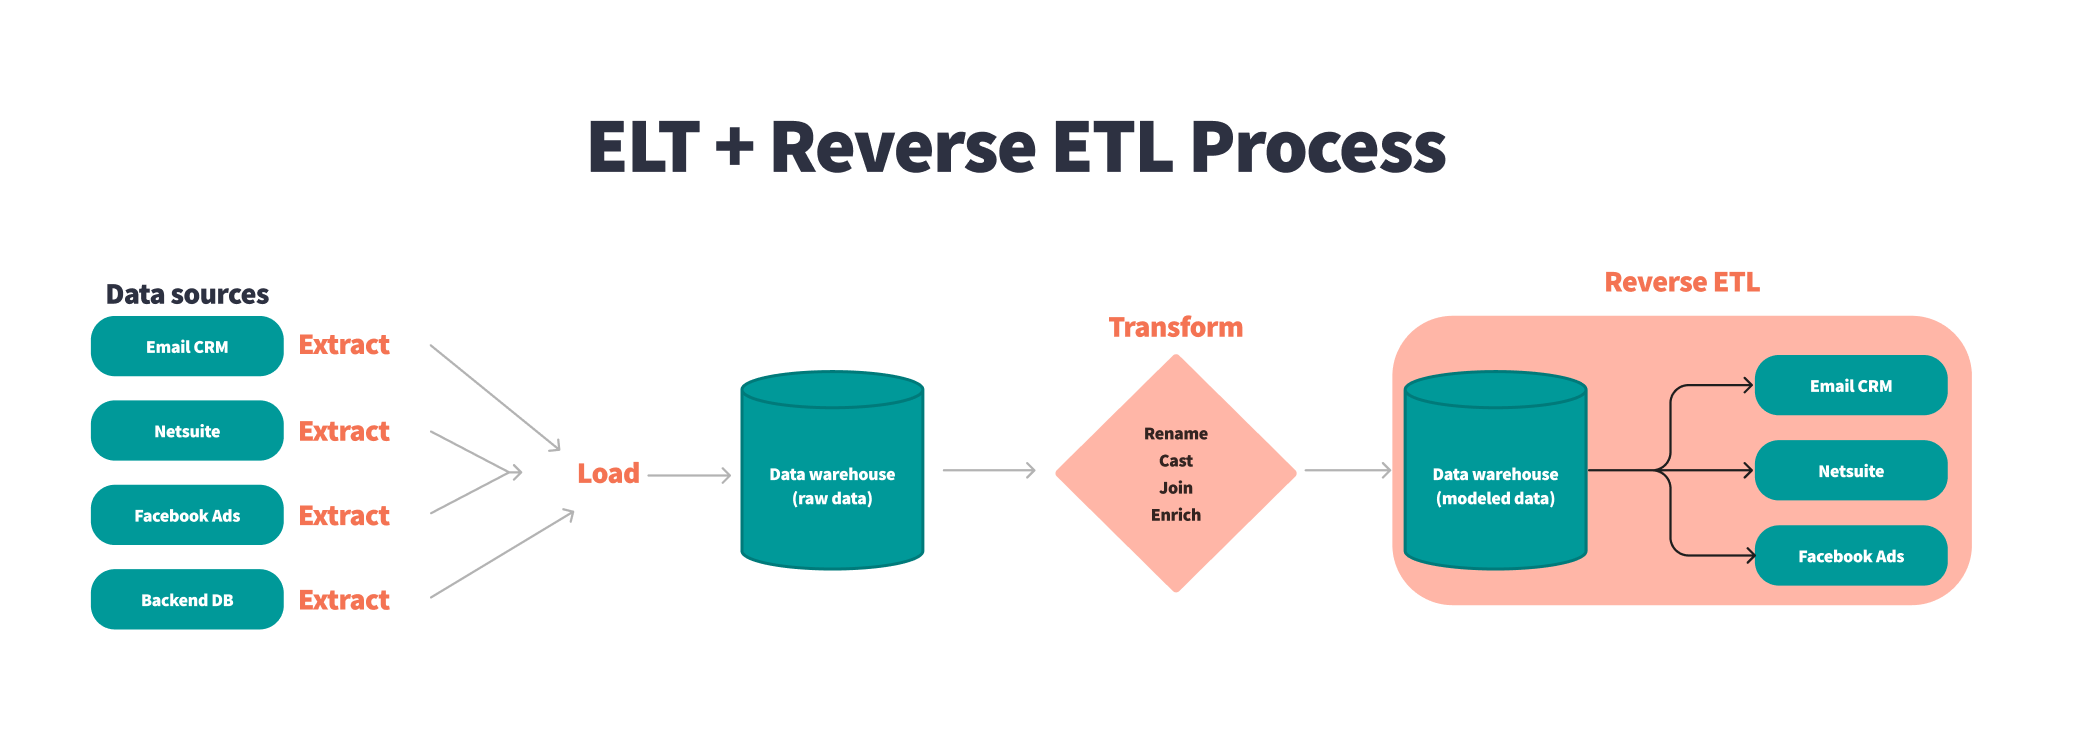 A diagram depicting how the reverse ETL process works. It starts with data being extract from data sources like email CRMs, Facebook Ad platforms, backend databases, and NetSuite. The raw data is then loaded into a data warehouse. After loading, the data is transformed and modeled. The modeled data is then loaded directly back into the tools that created the data, like Email CRMs, Facebook Ad platforms, and others so the insights are more accessible to business users.